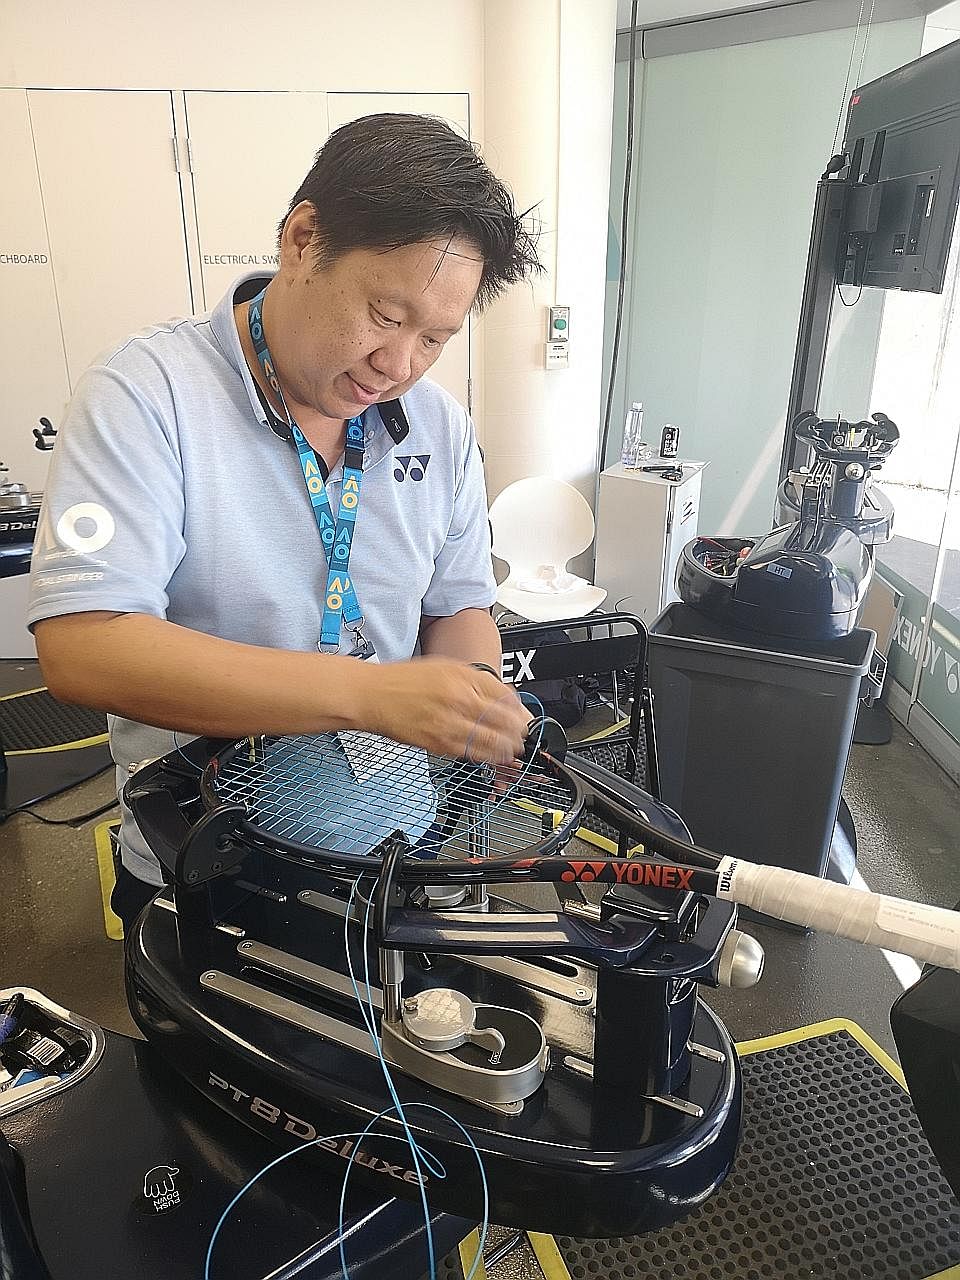 Singaporean Melvin Tan helped string more than 200 rackets as part of the Yonex racket-stringing team at the Australian Open in Melbourne.